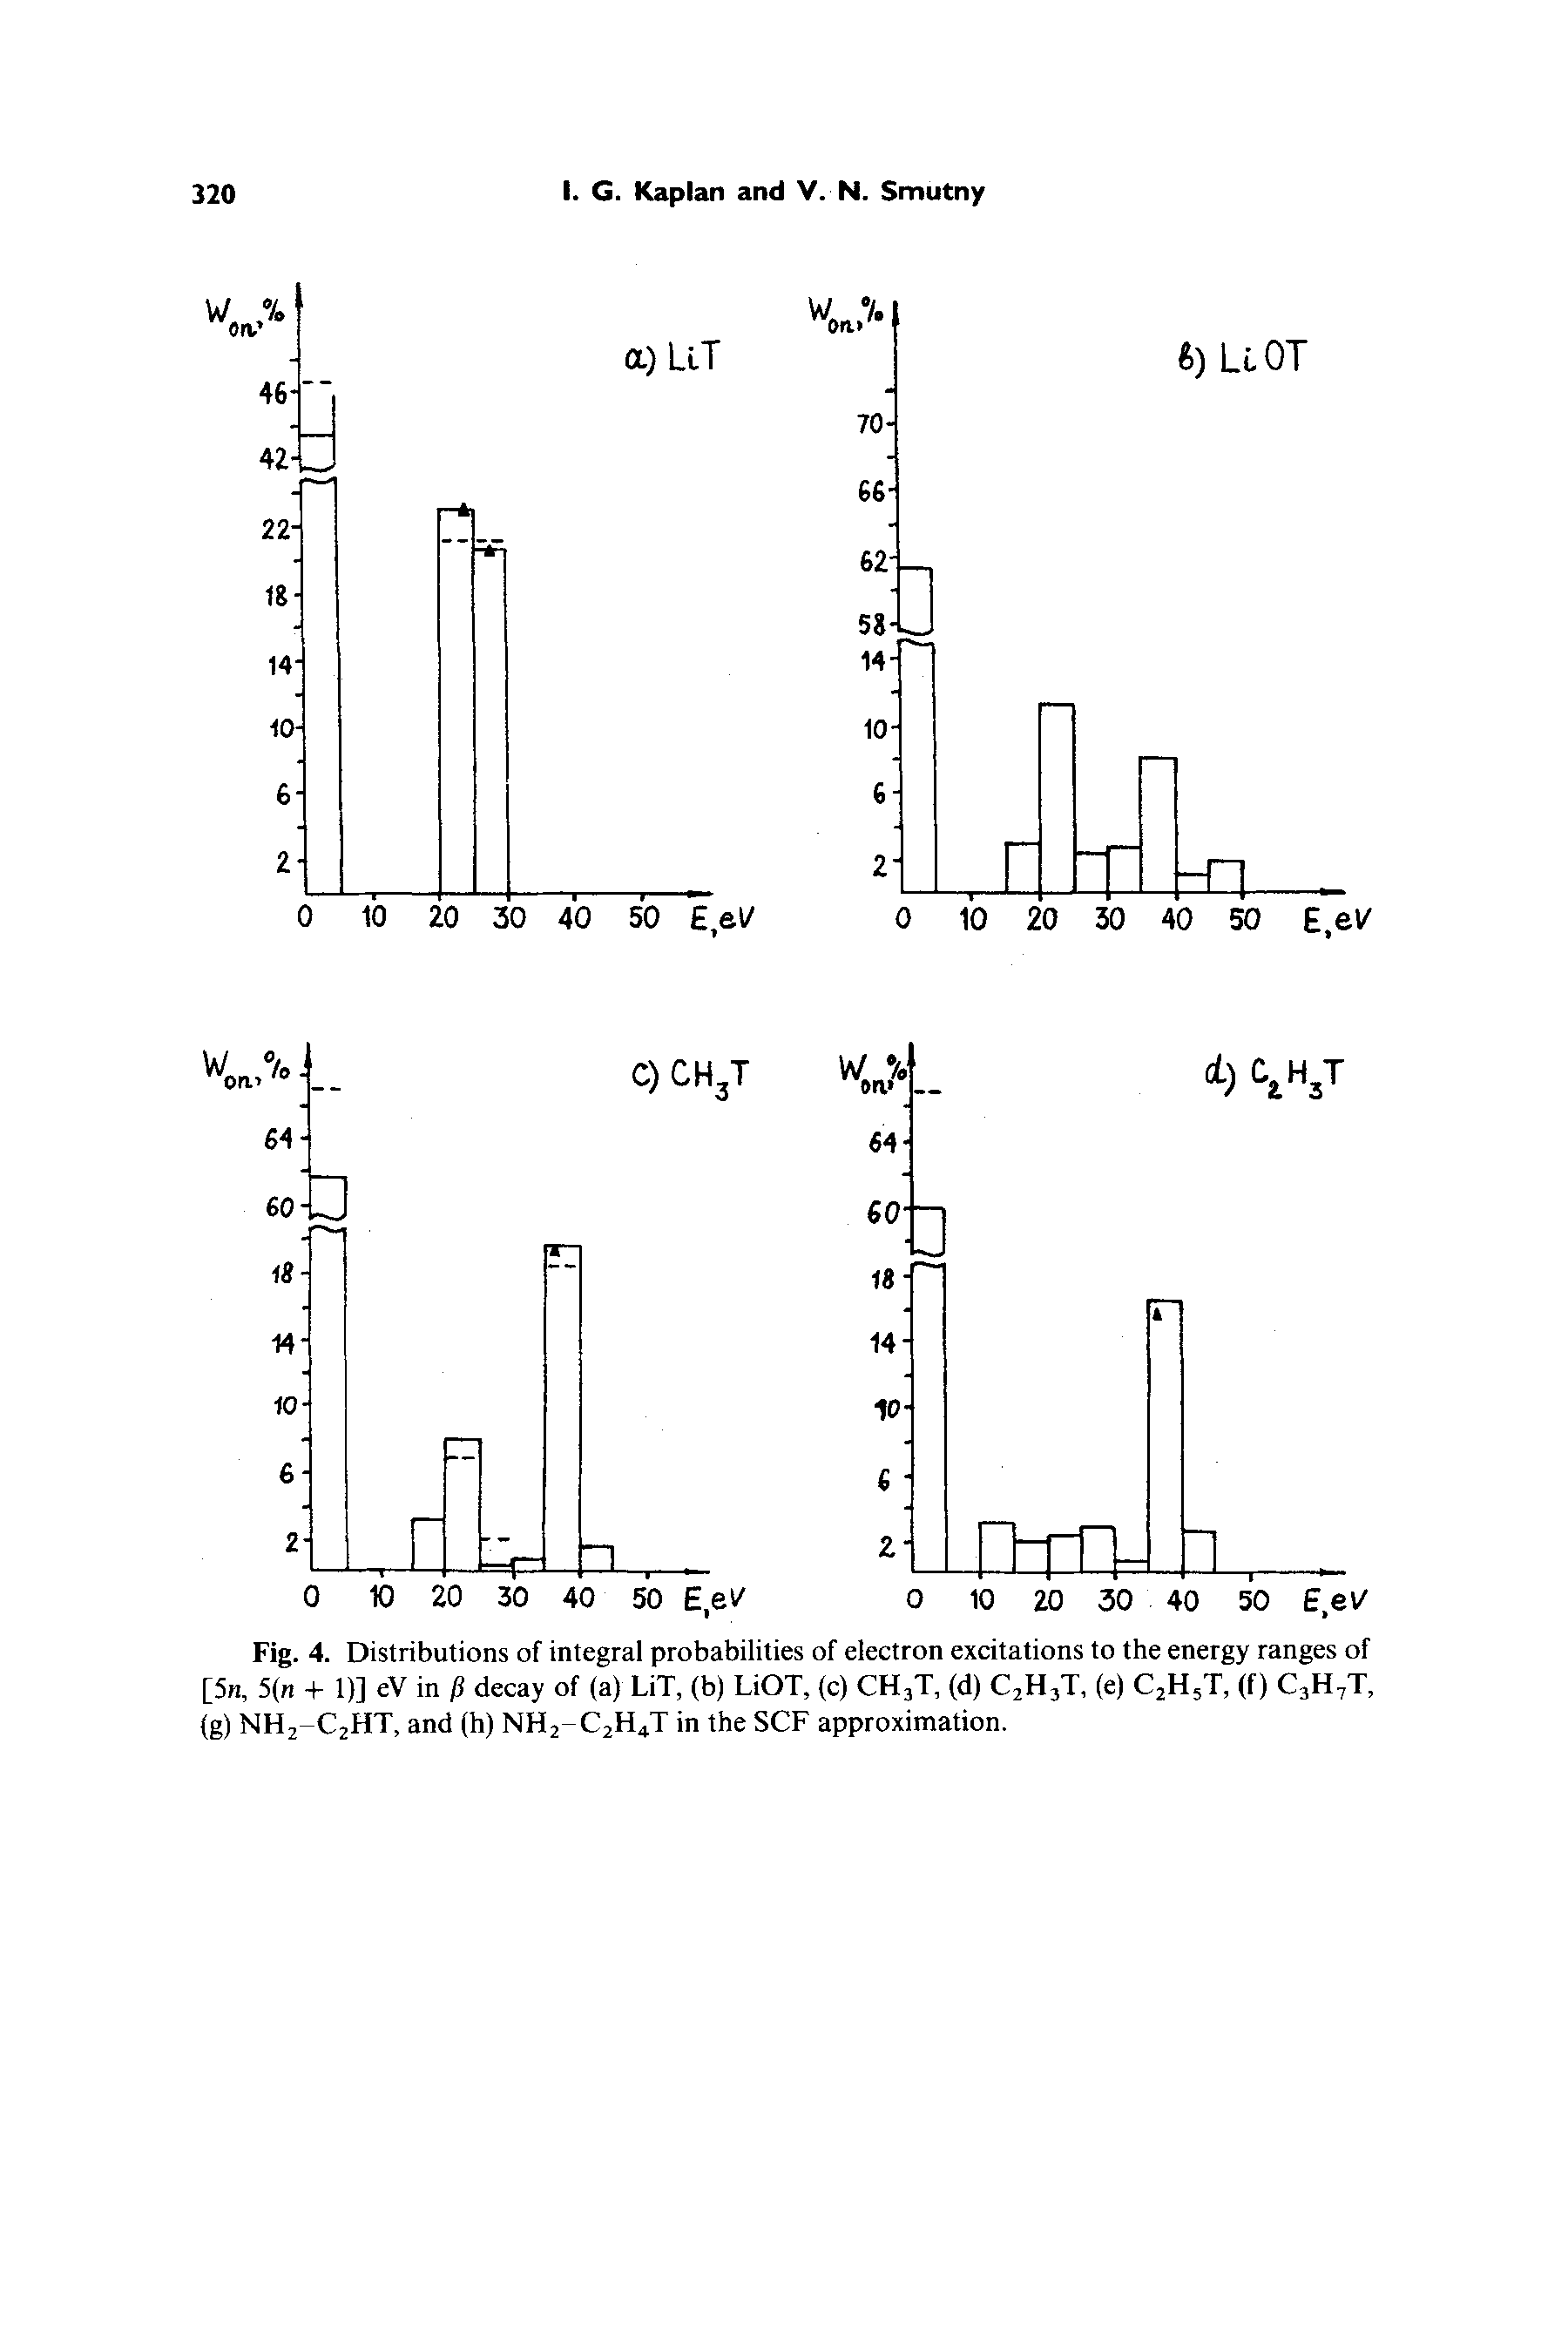 Fig. 4. Distributions of integral probabilities of electron excitations to the energy ranges of [5n, 5(n + 1)] eV in fl decay of (a) LiT, (b) LiOT, (c) CH3T, (d) C2H3T, (e) C2H5T, (f) C3H7T, (g) NH2-C2HT, and (h) NH2-C2H4T in the SCF approximation.